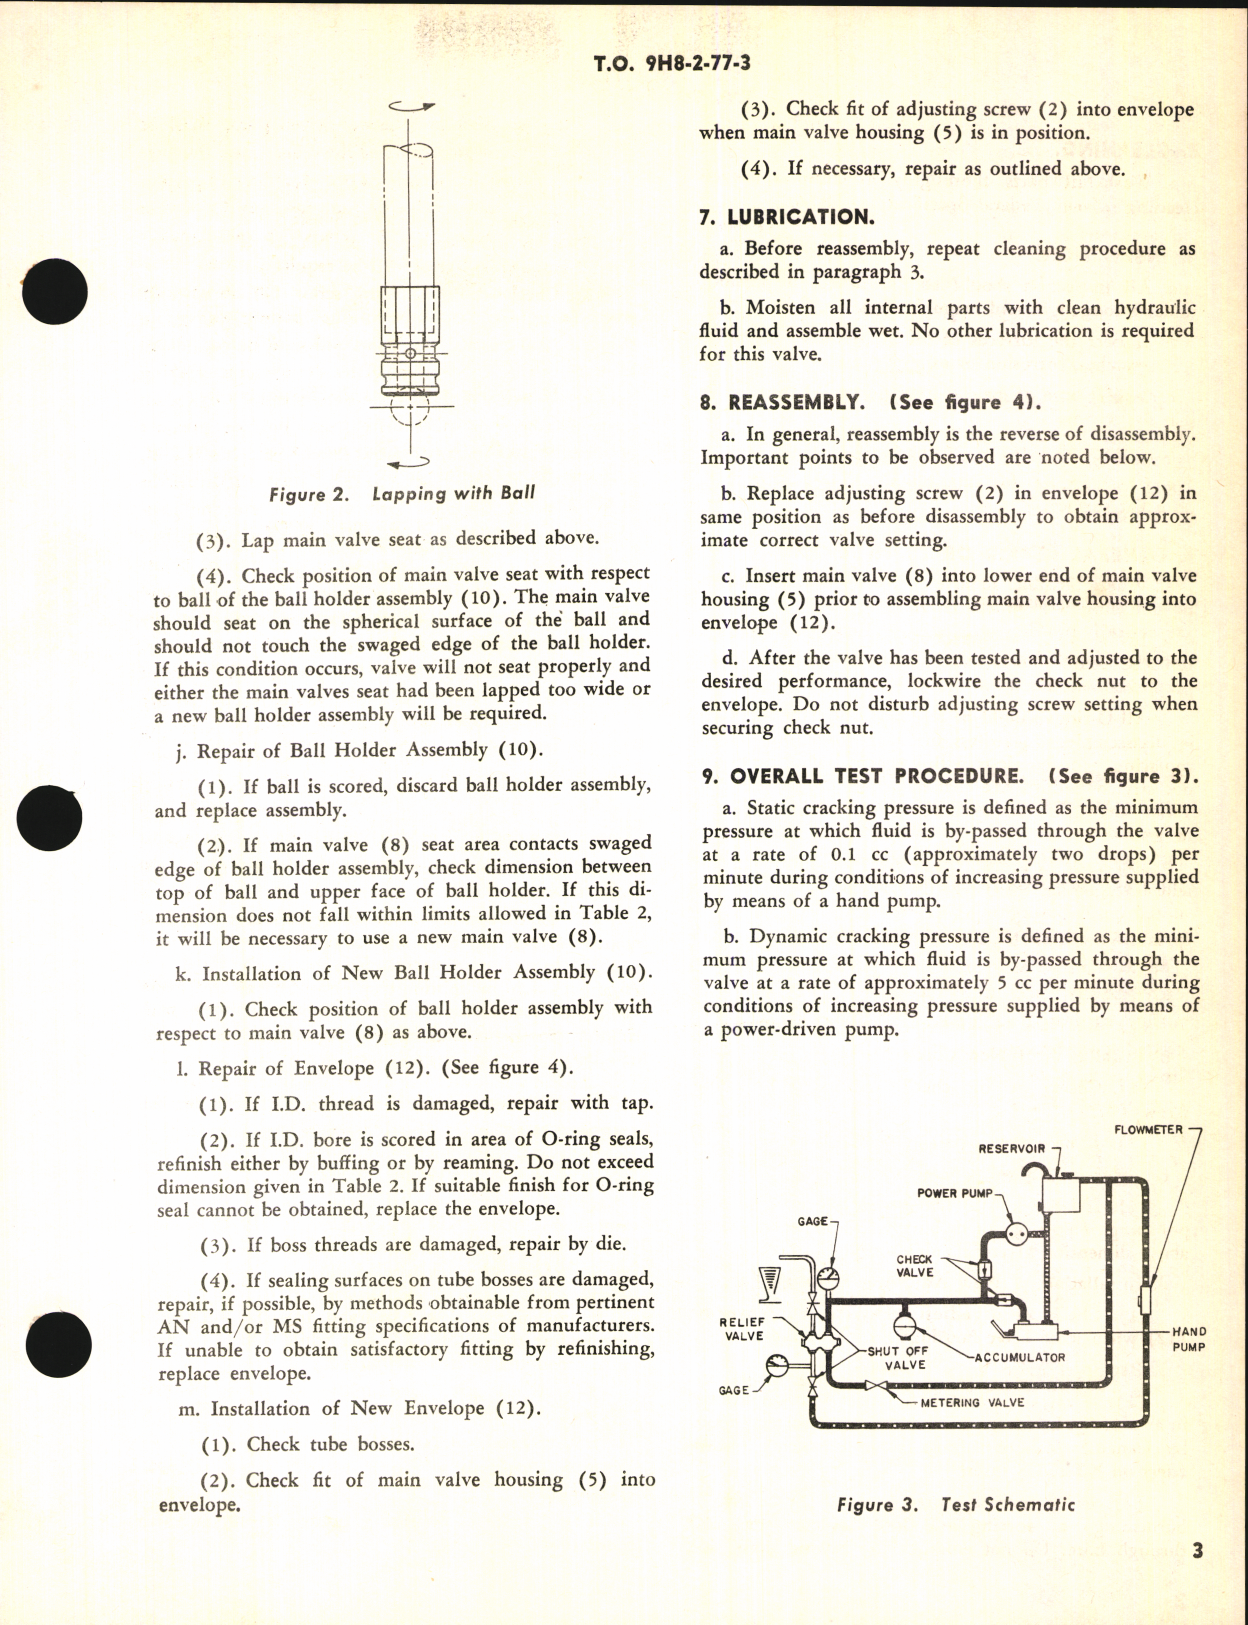 Sample page 3 from AirCorps Library document: Overhaul Instructions with Parts Breakdown for Hydraulic Pressure Relief Valve AB-4-01-1225